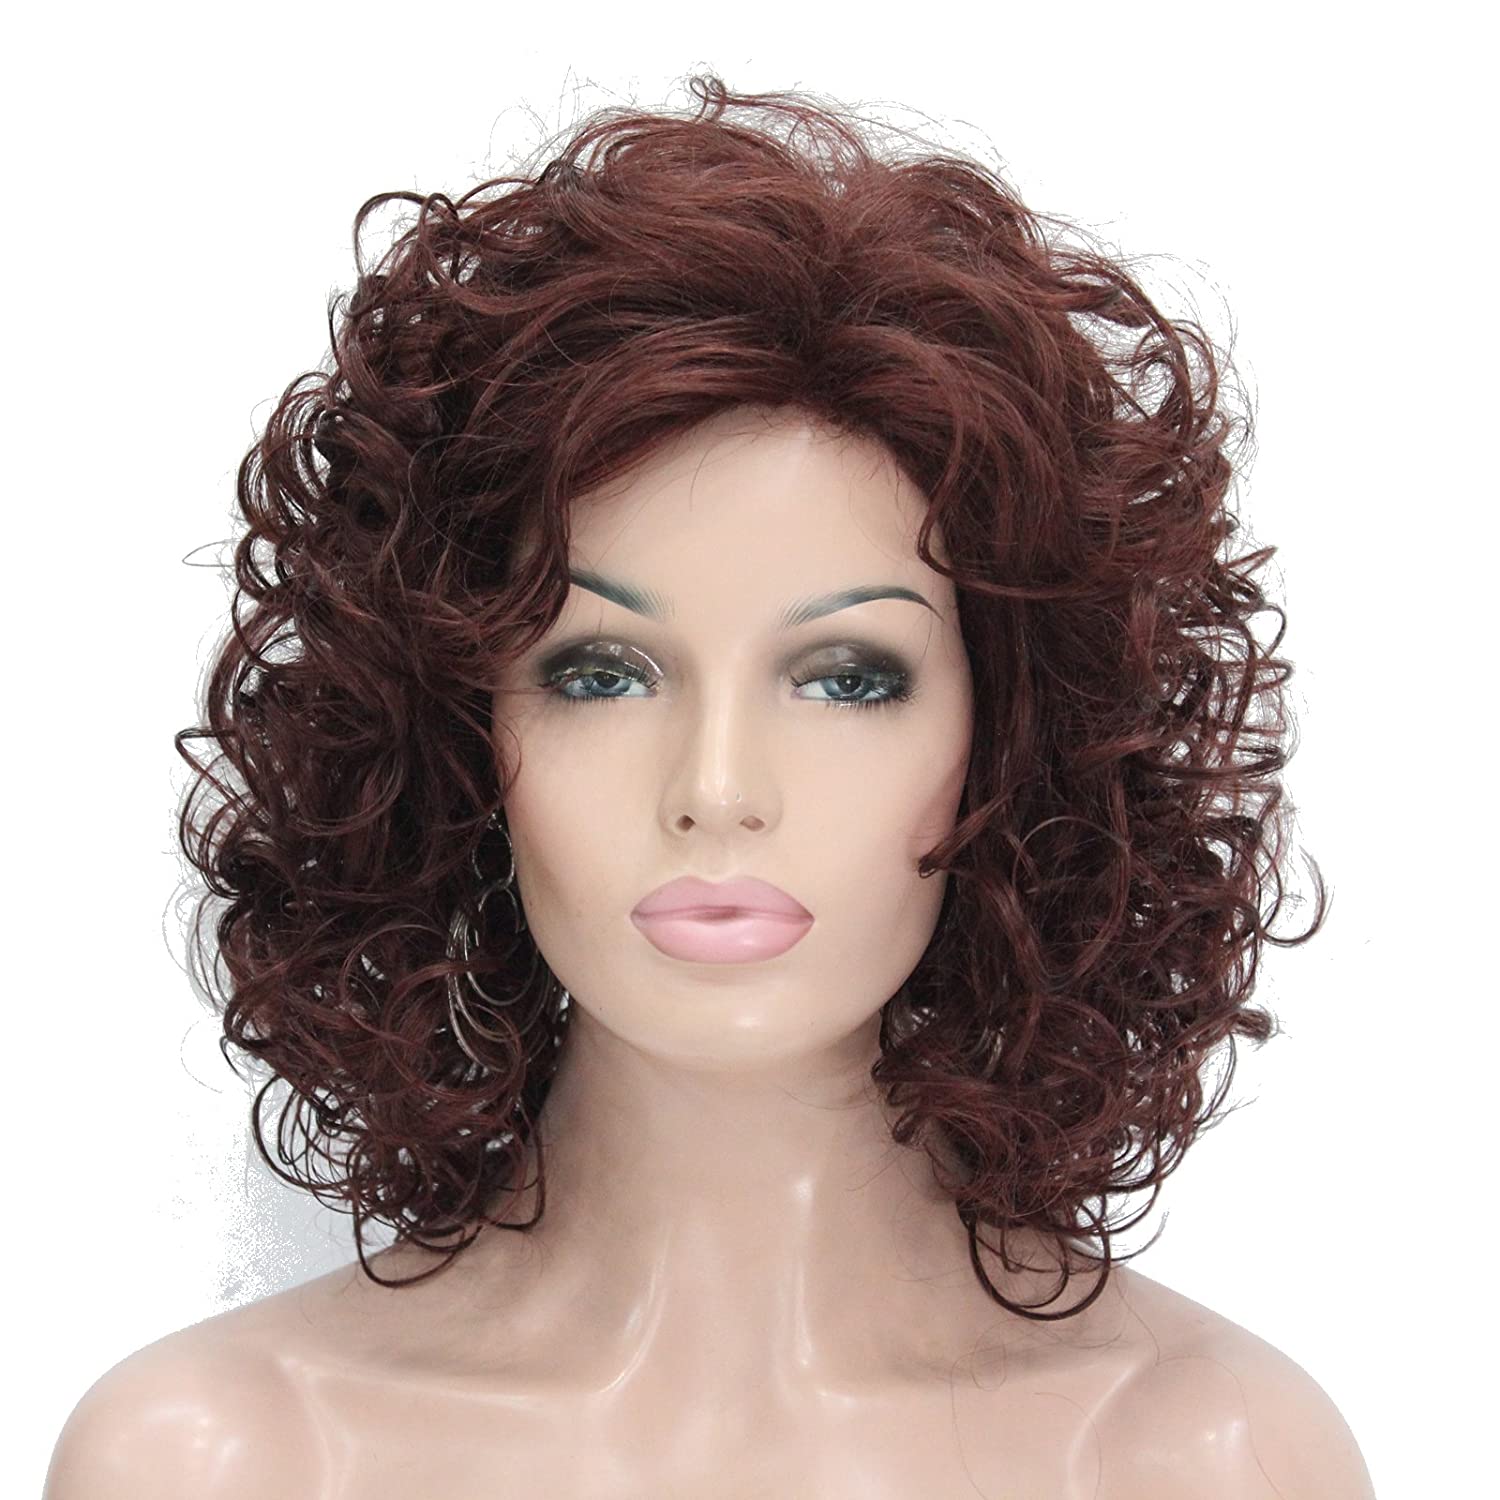 Short Uniform-Layered Curly Hairstyle - TheHairStyler.com